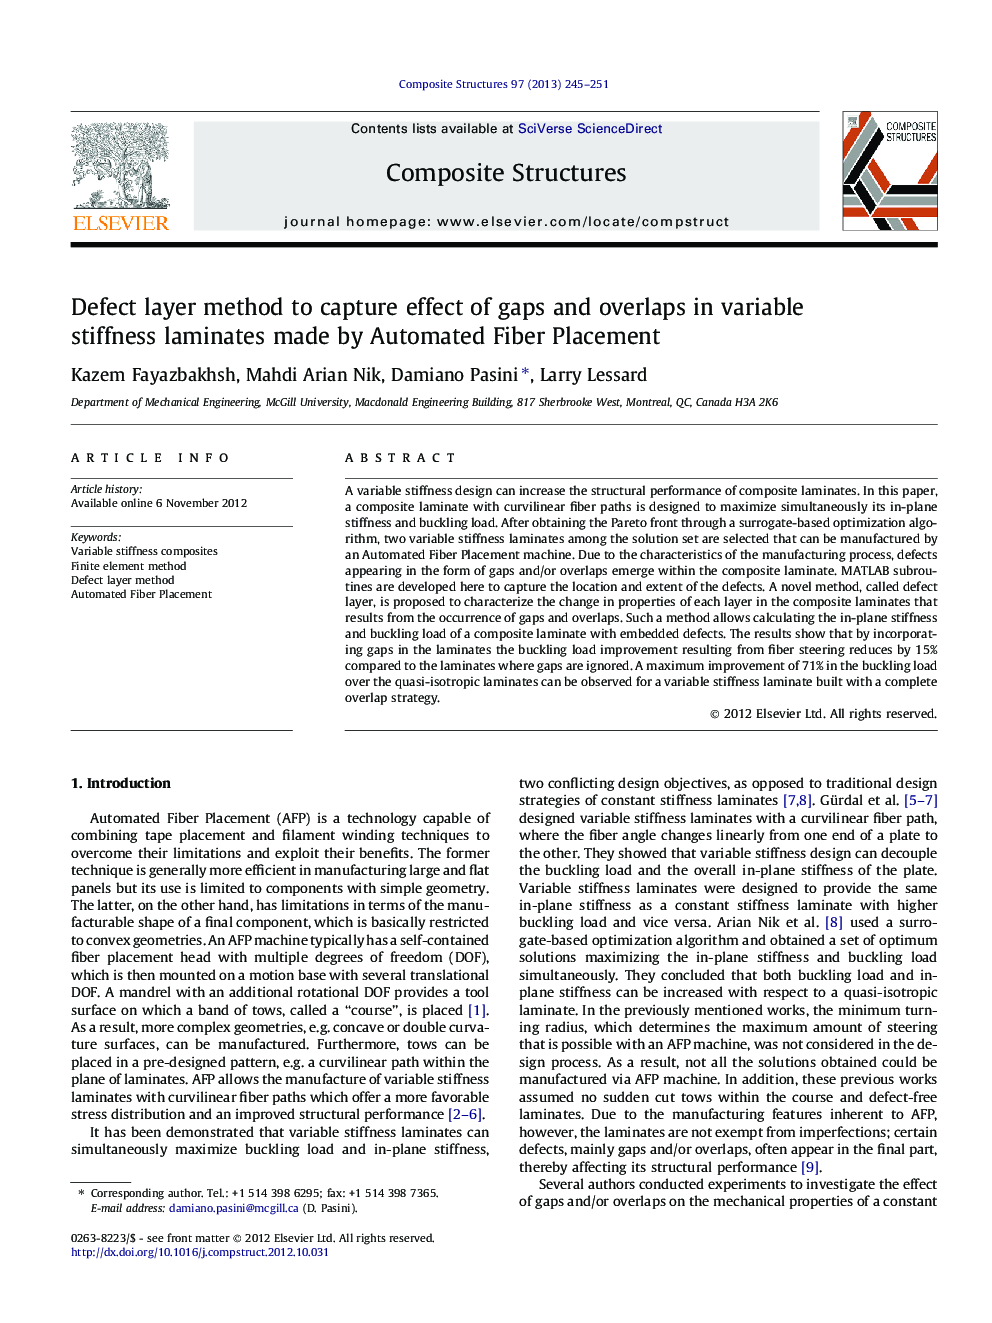 Defect layer method to capture effect of gaps and overlaps in variable stiffness laminates made by Automated Fiber Placement